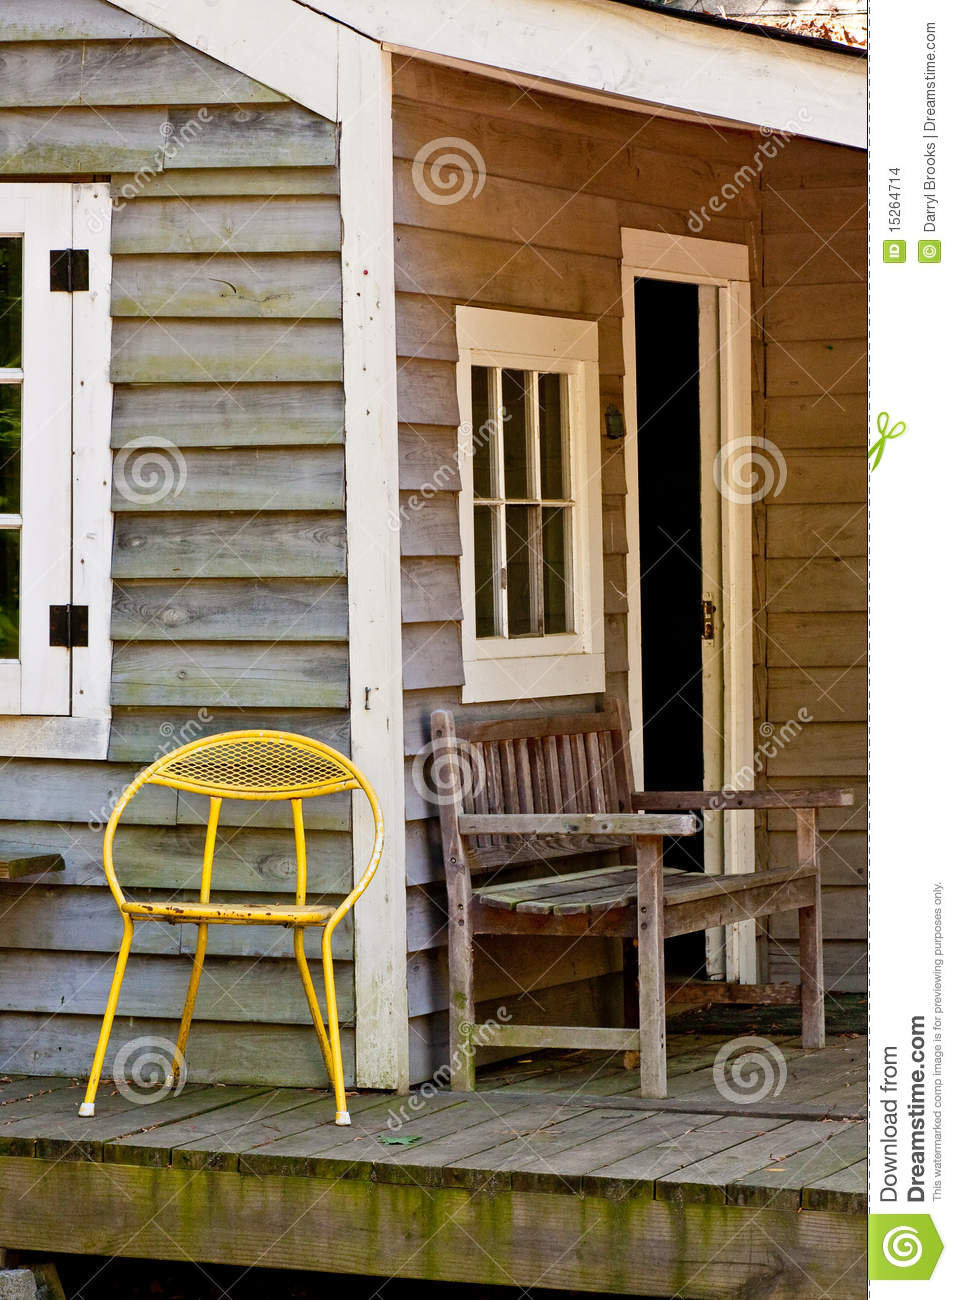 Metal Chair On An Old Bungalow Porch Stock Images   Image  15264714